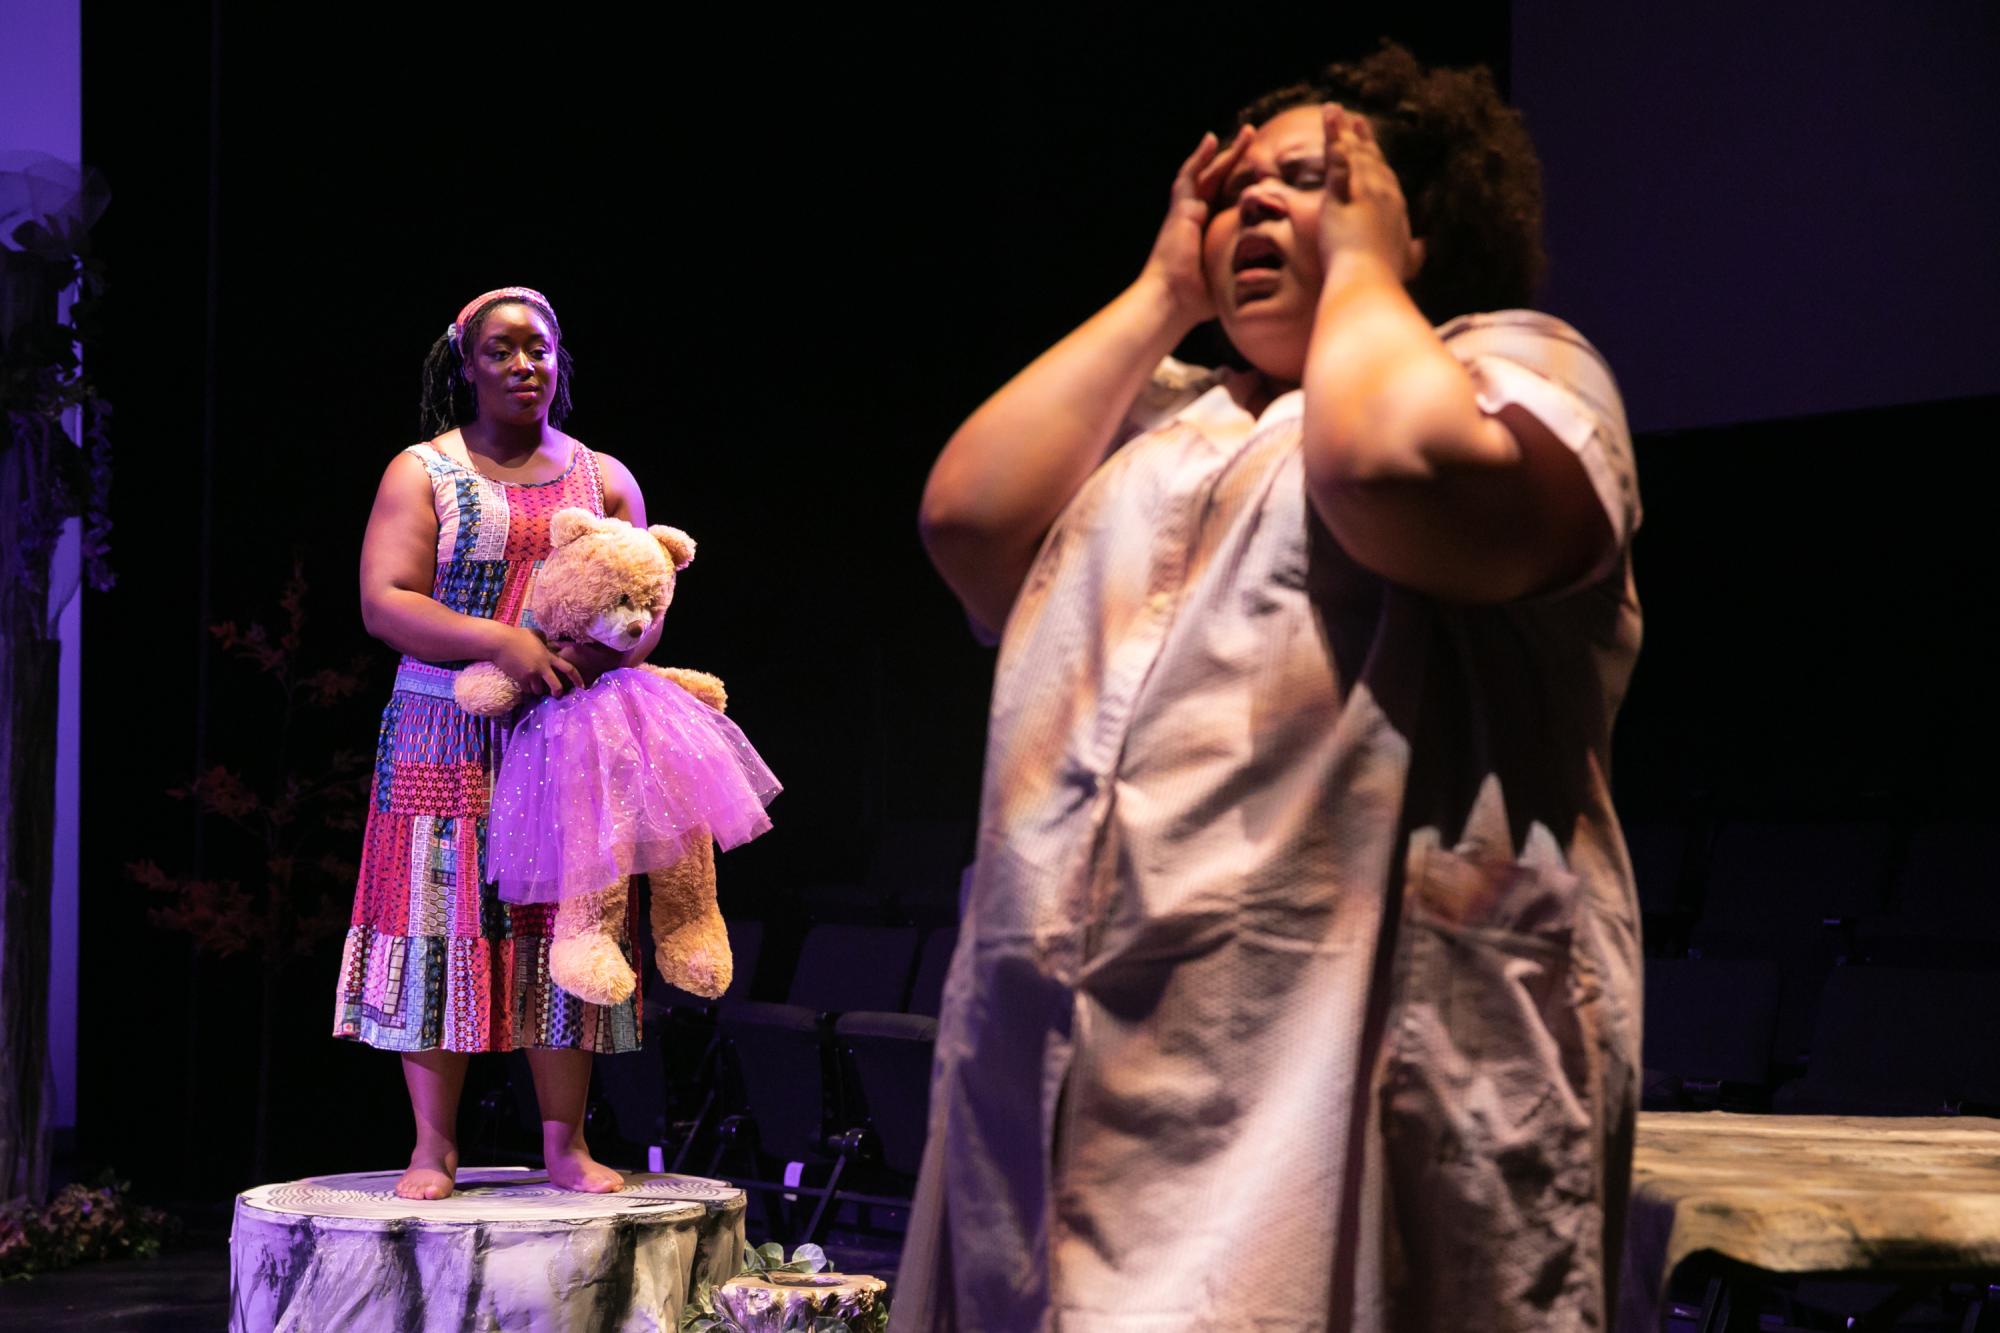 An actor wearing a long purple night gown holds their hands to their temples, while another actor in the background holding a large teddy bear watches and comforts them